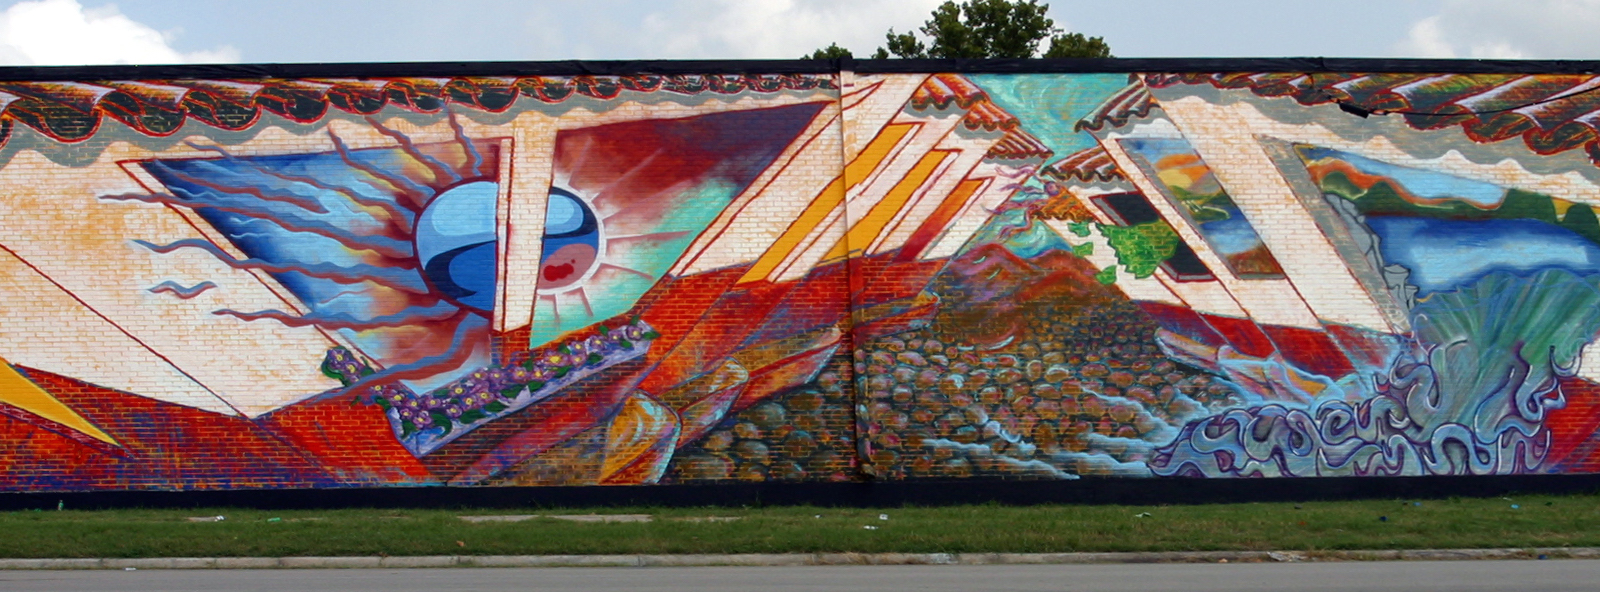 Explore the East End Murals